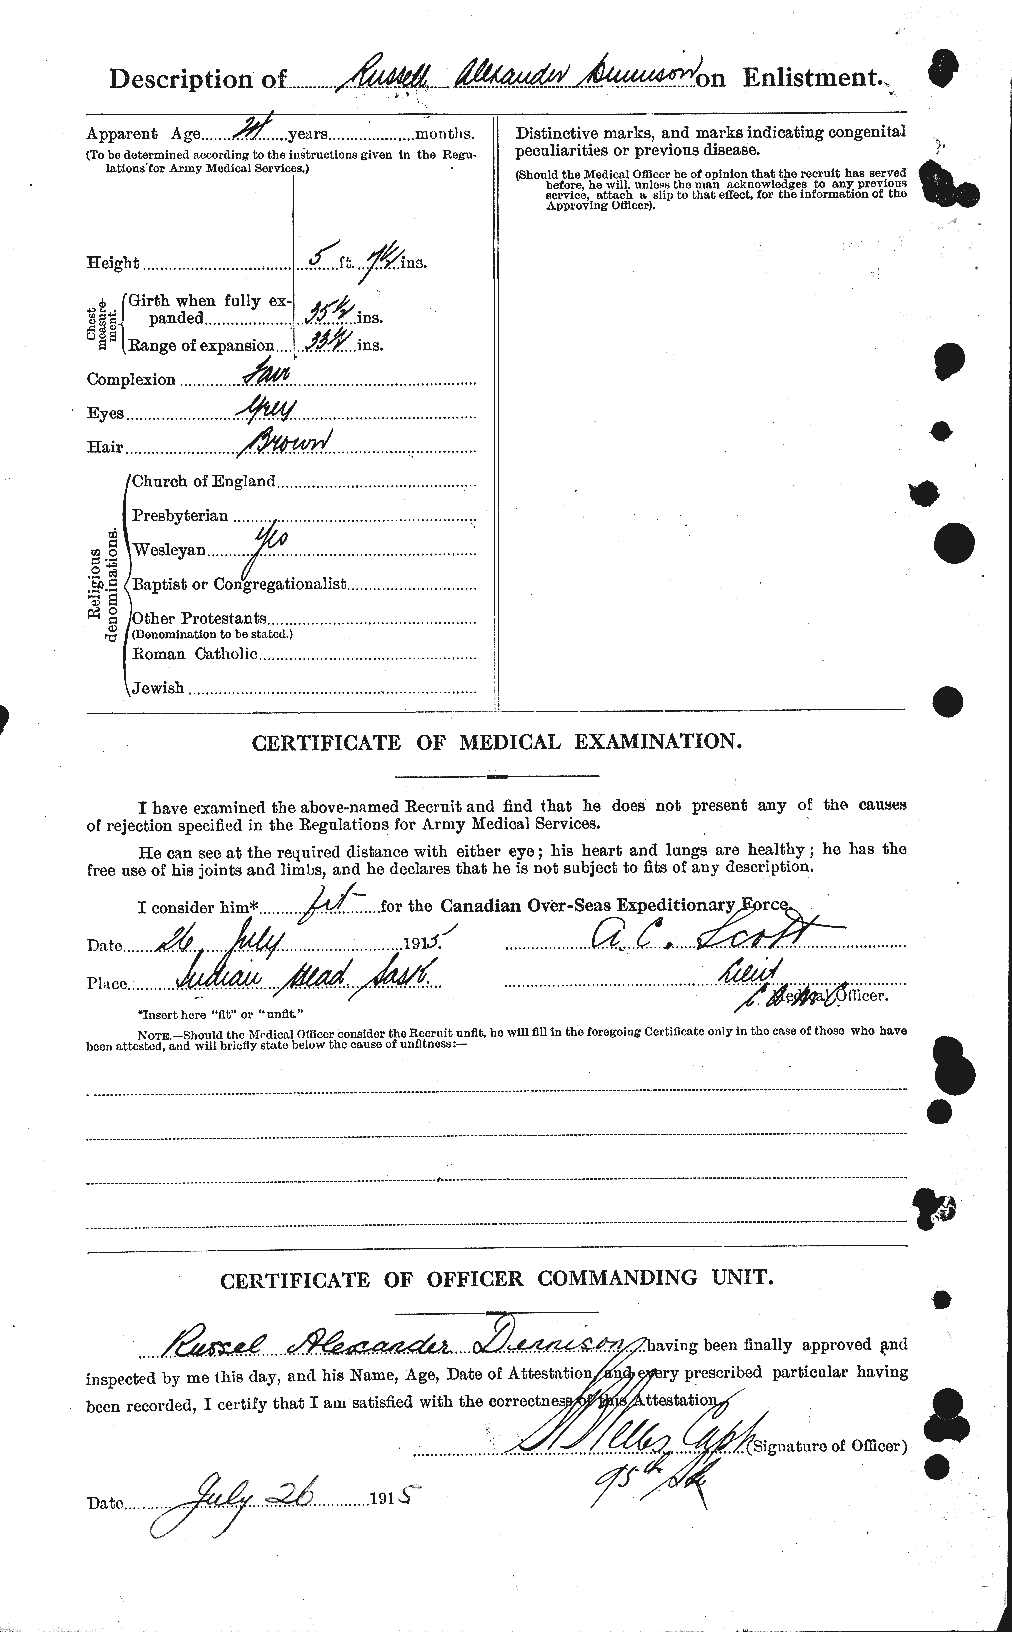 Personnel Records of the First World War - CEF 286328b